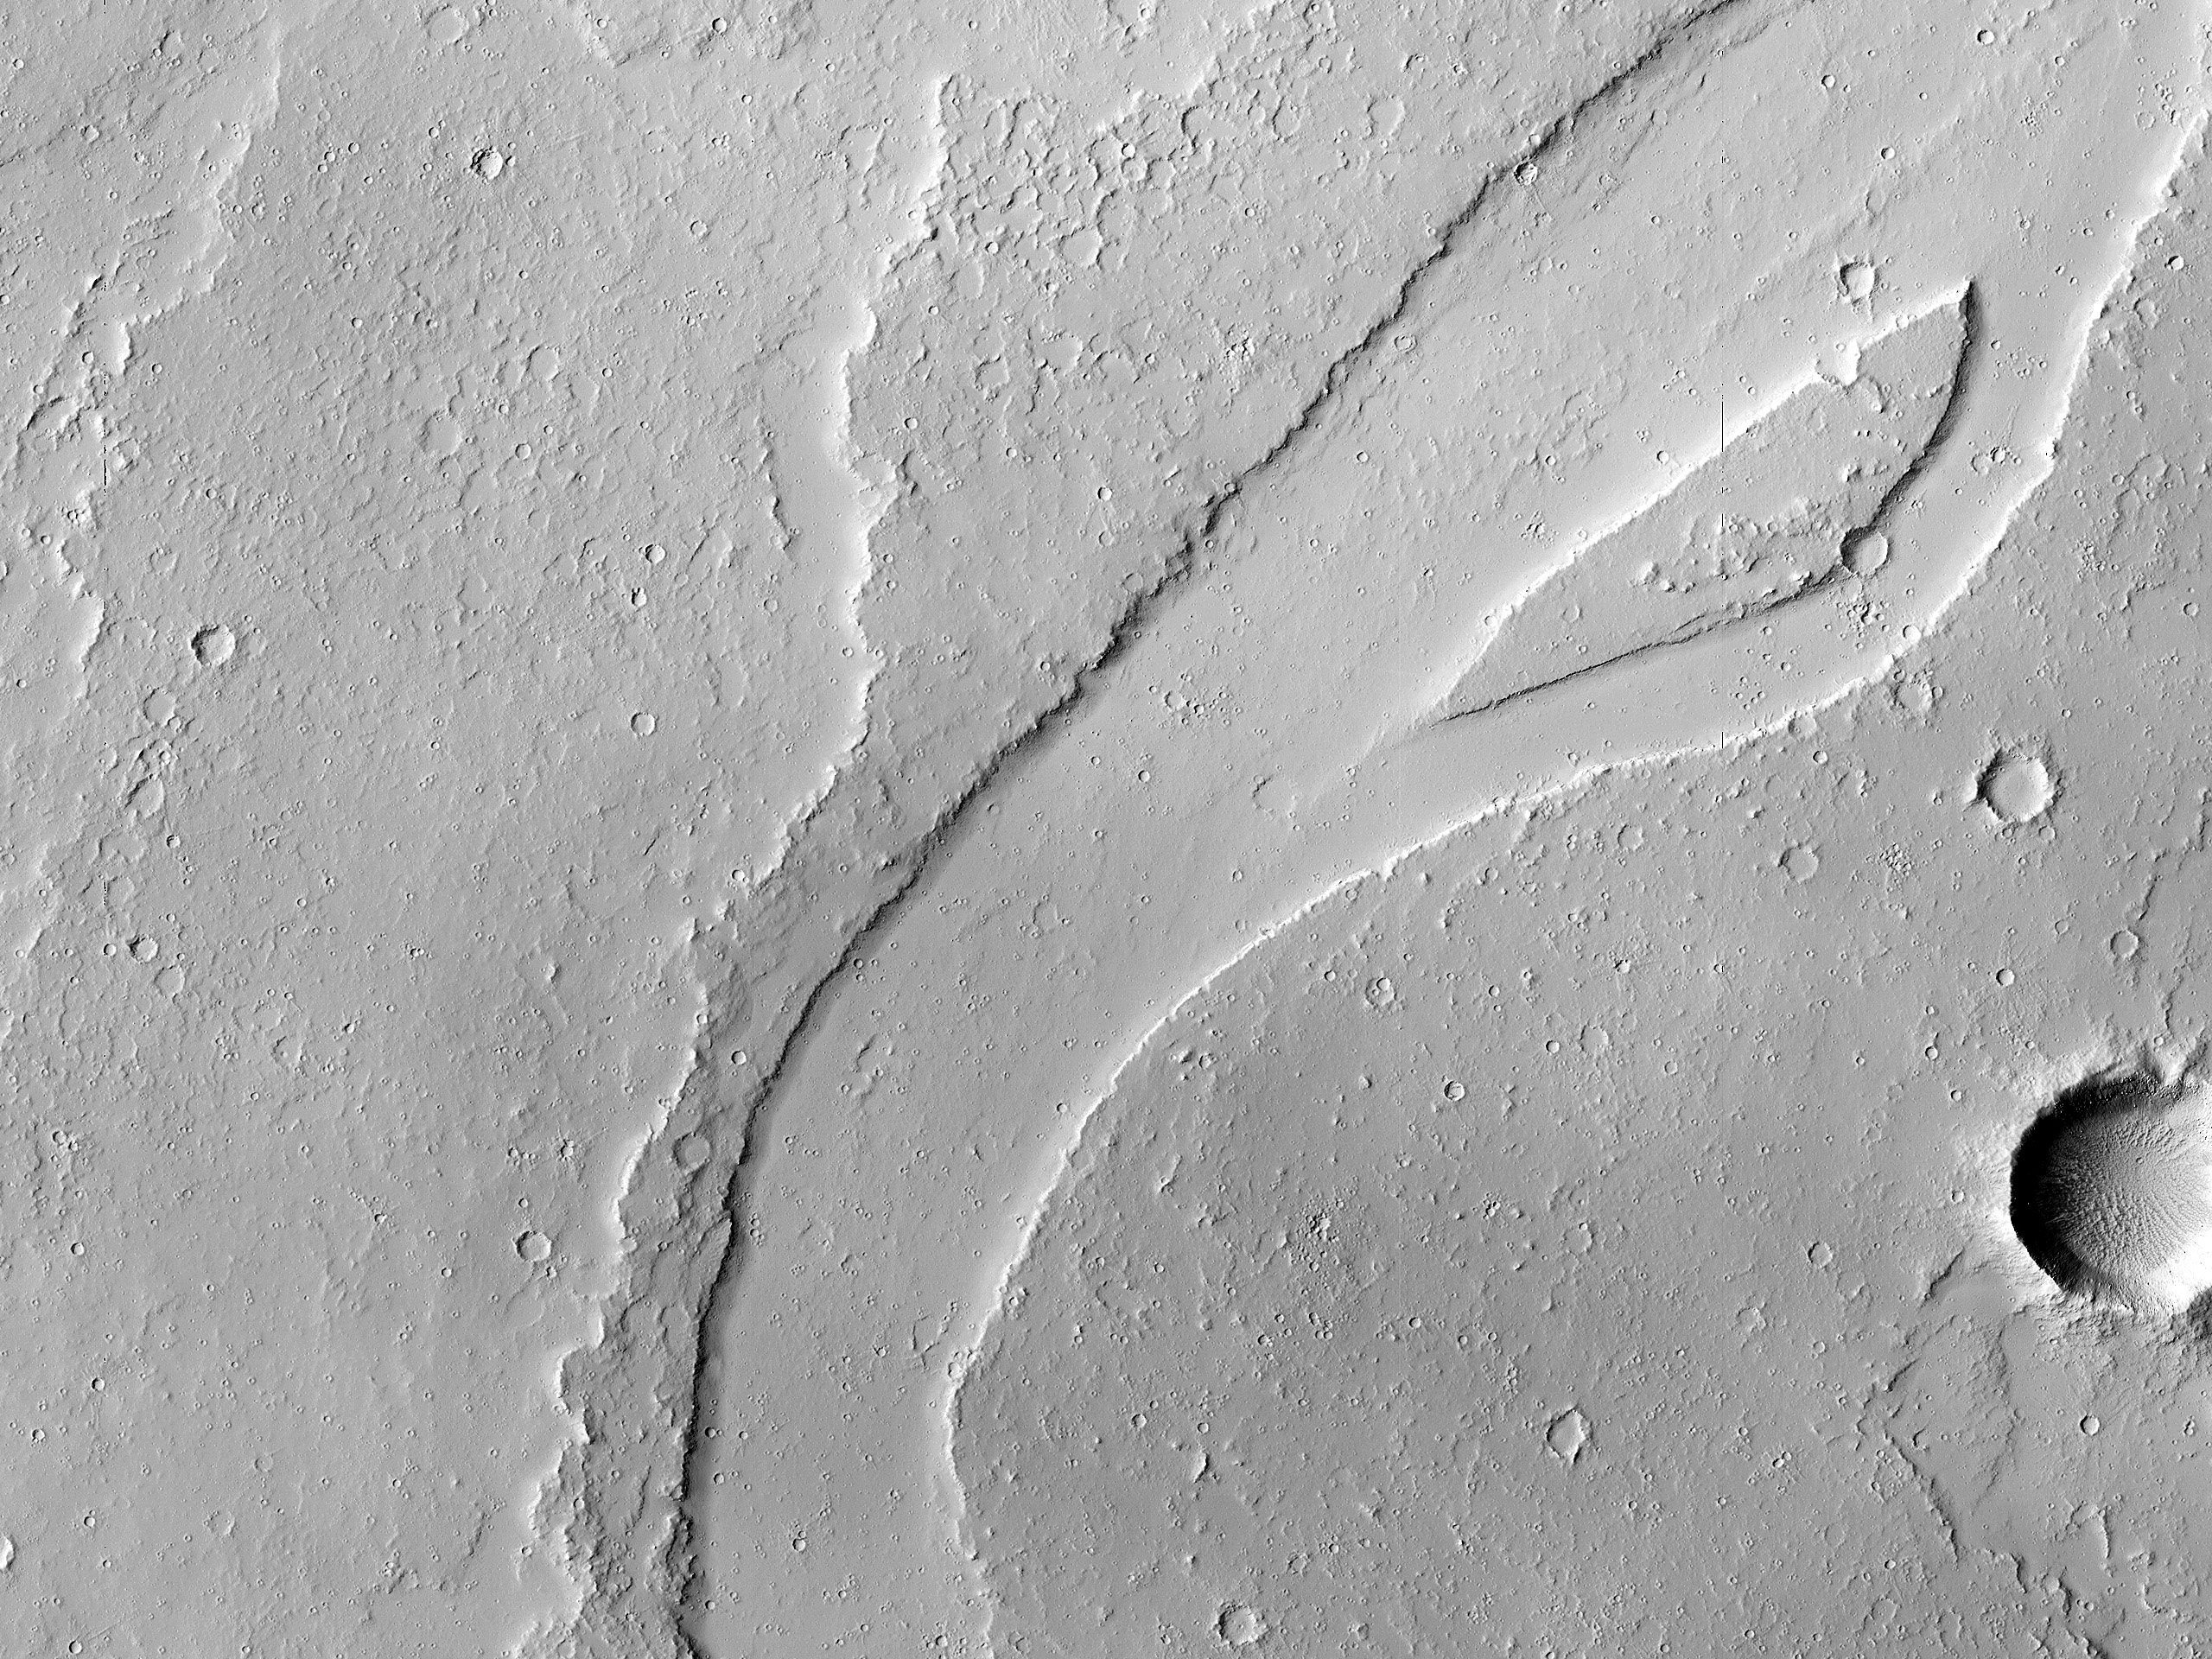 A Long and Winding Channel in Tharsis